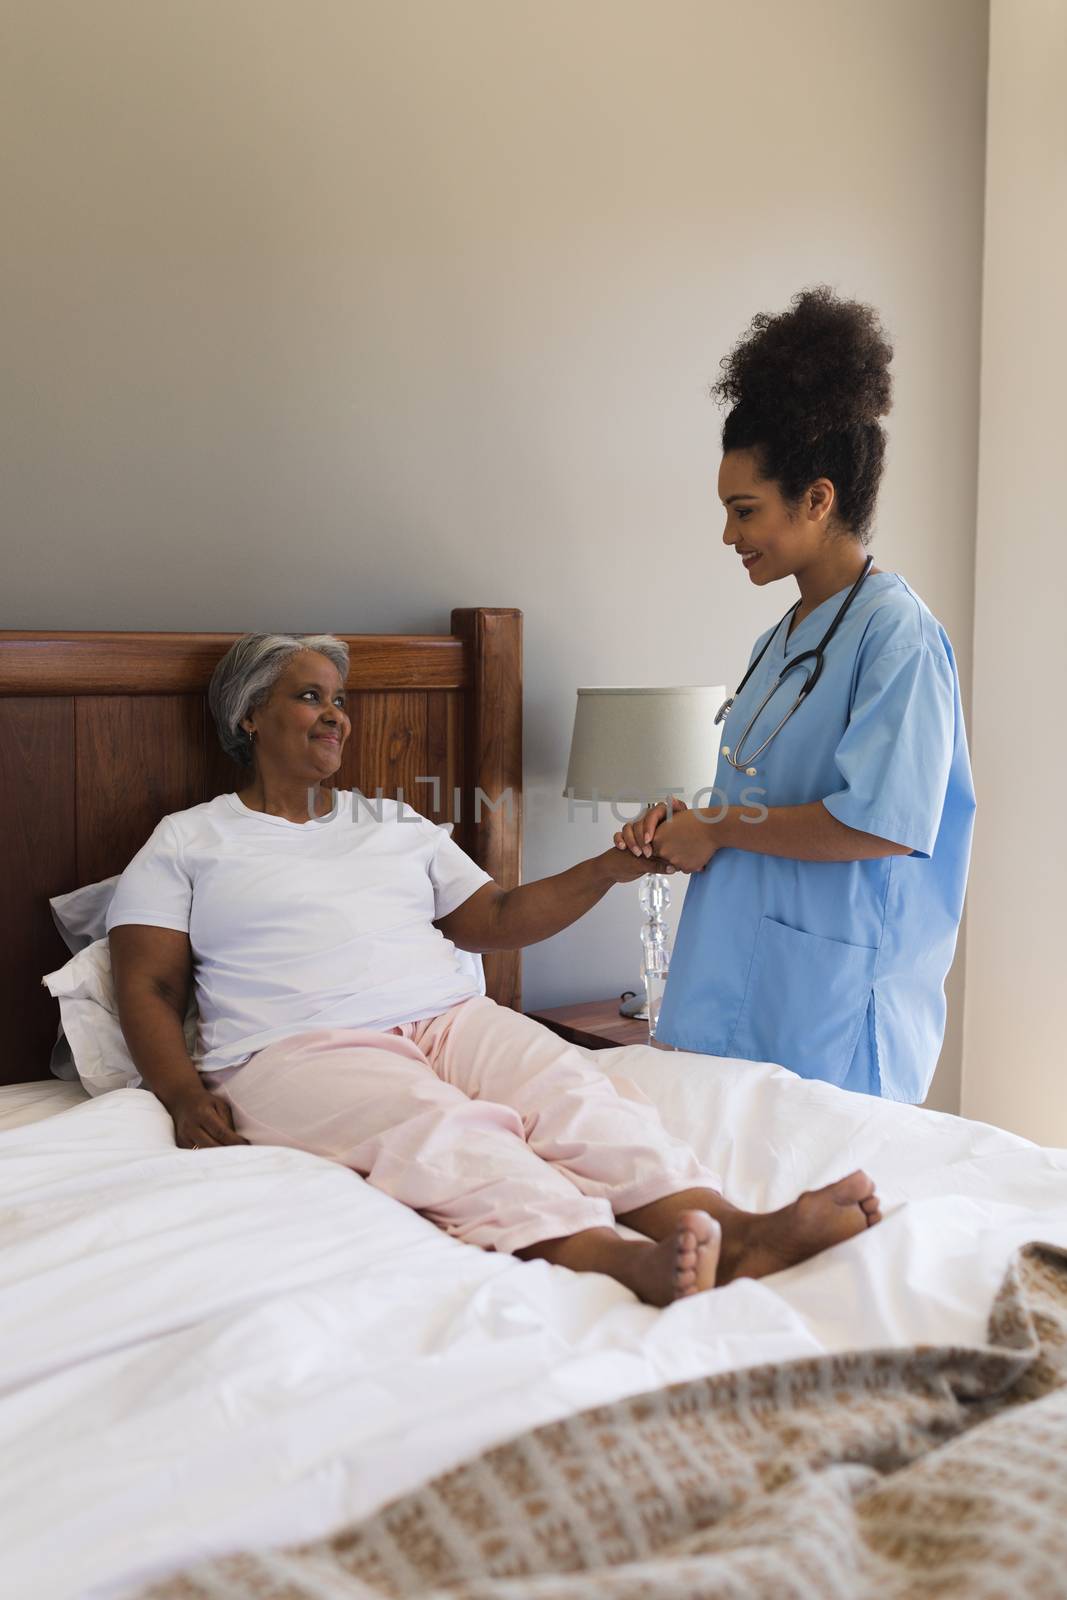 Female doctor consoling senior woman in bedroom by Wavebreakmedia